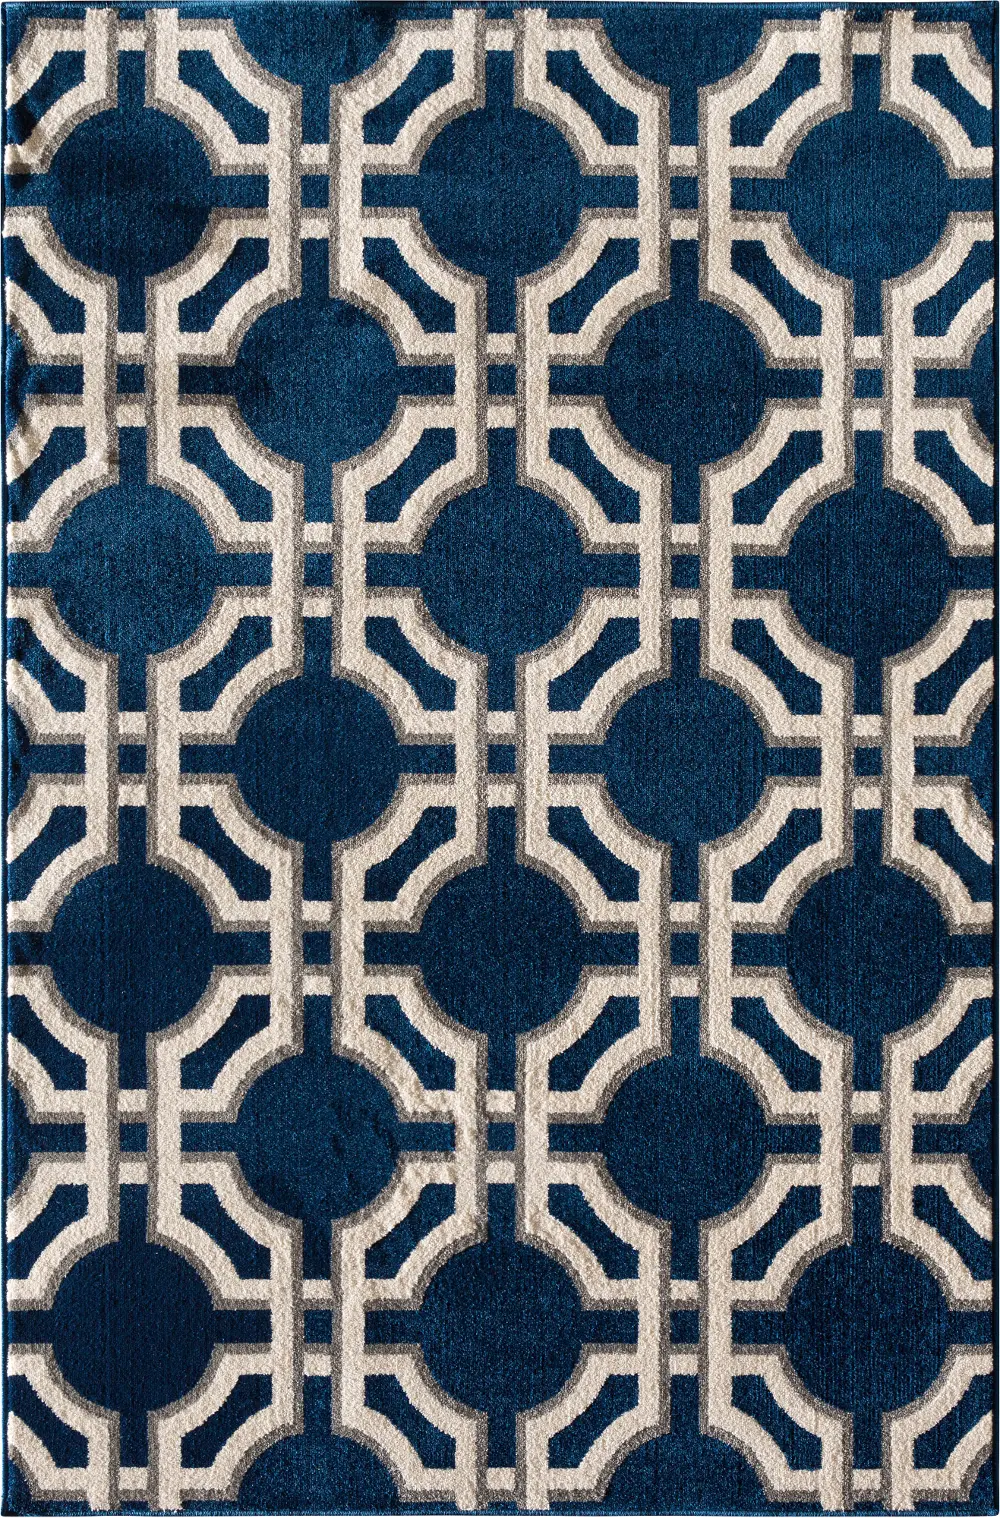 5 x 7 Medium Sapphire Blue and White Indoor-Outdoor Rug - Terrace-1